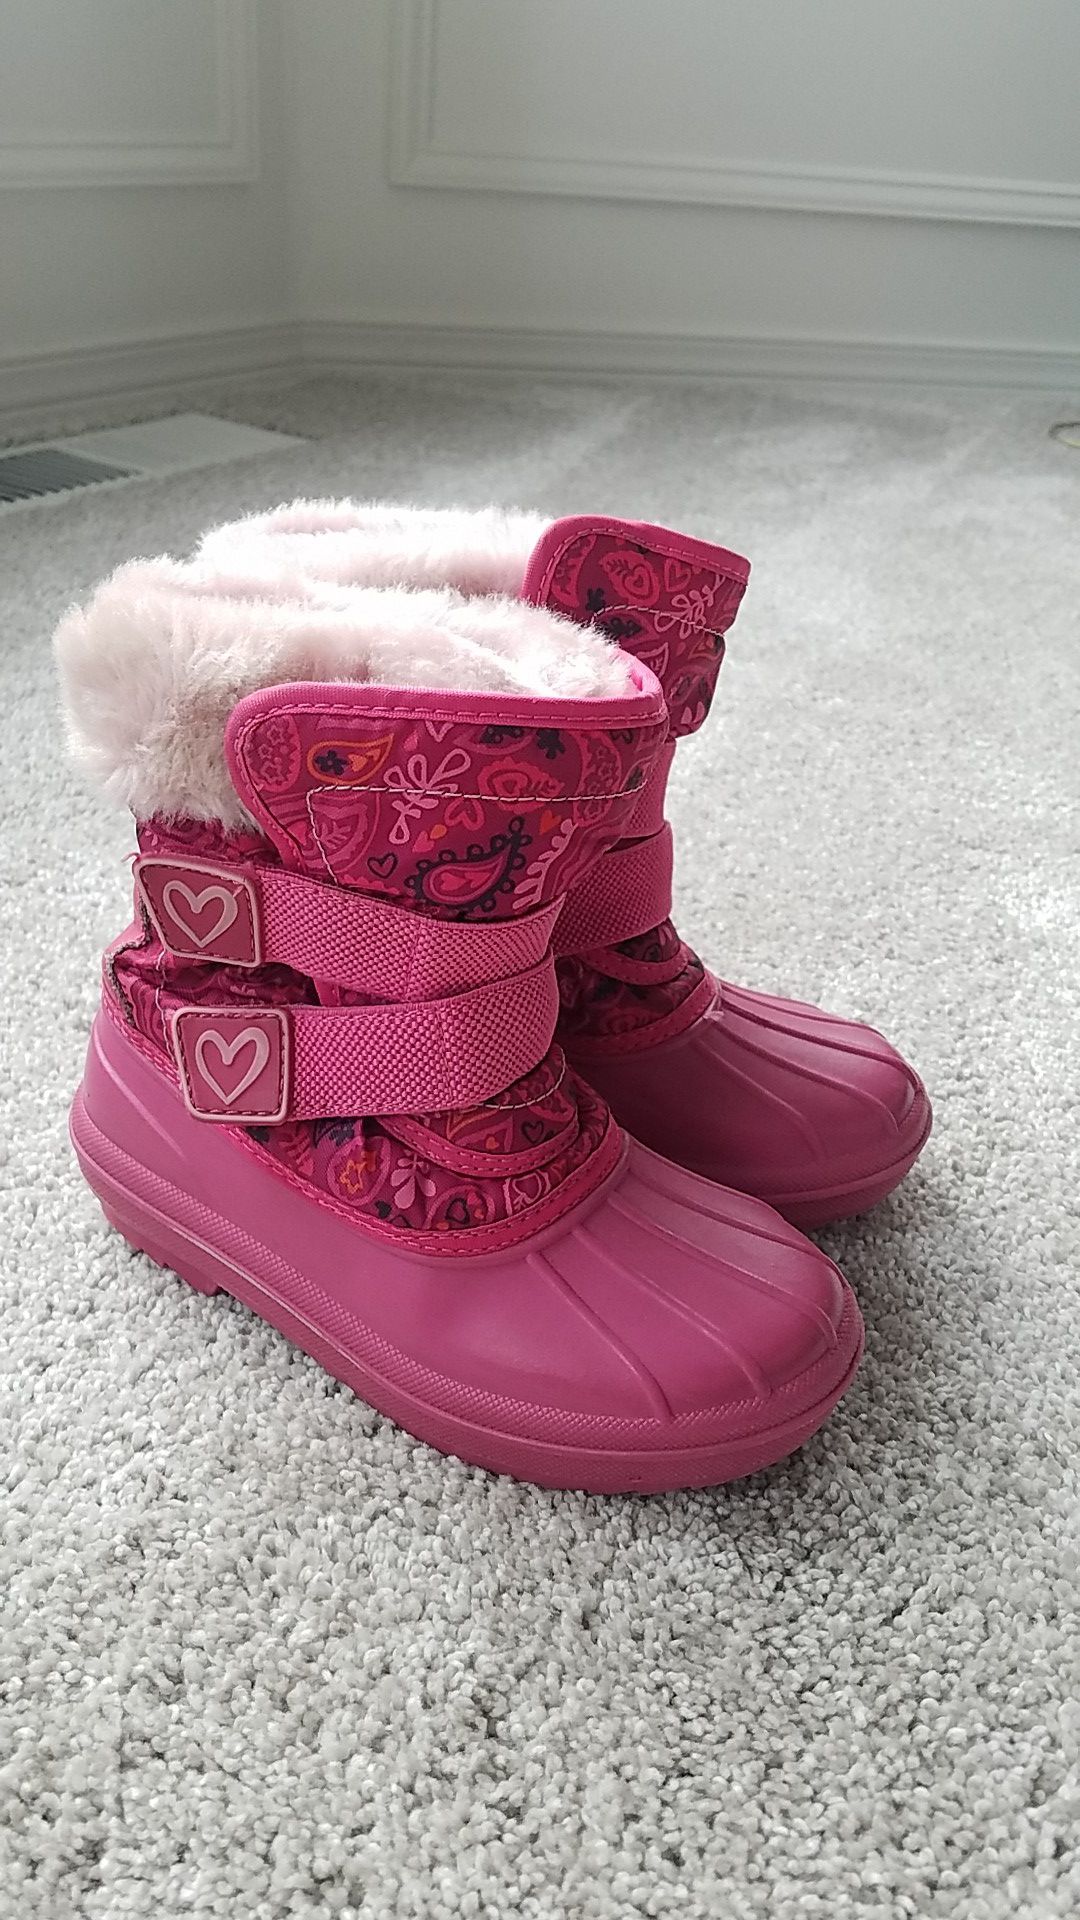 Thermolite Little Girls snow boots size 9/10